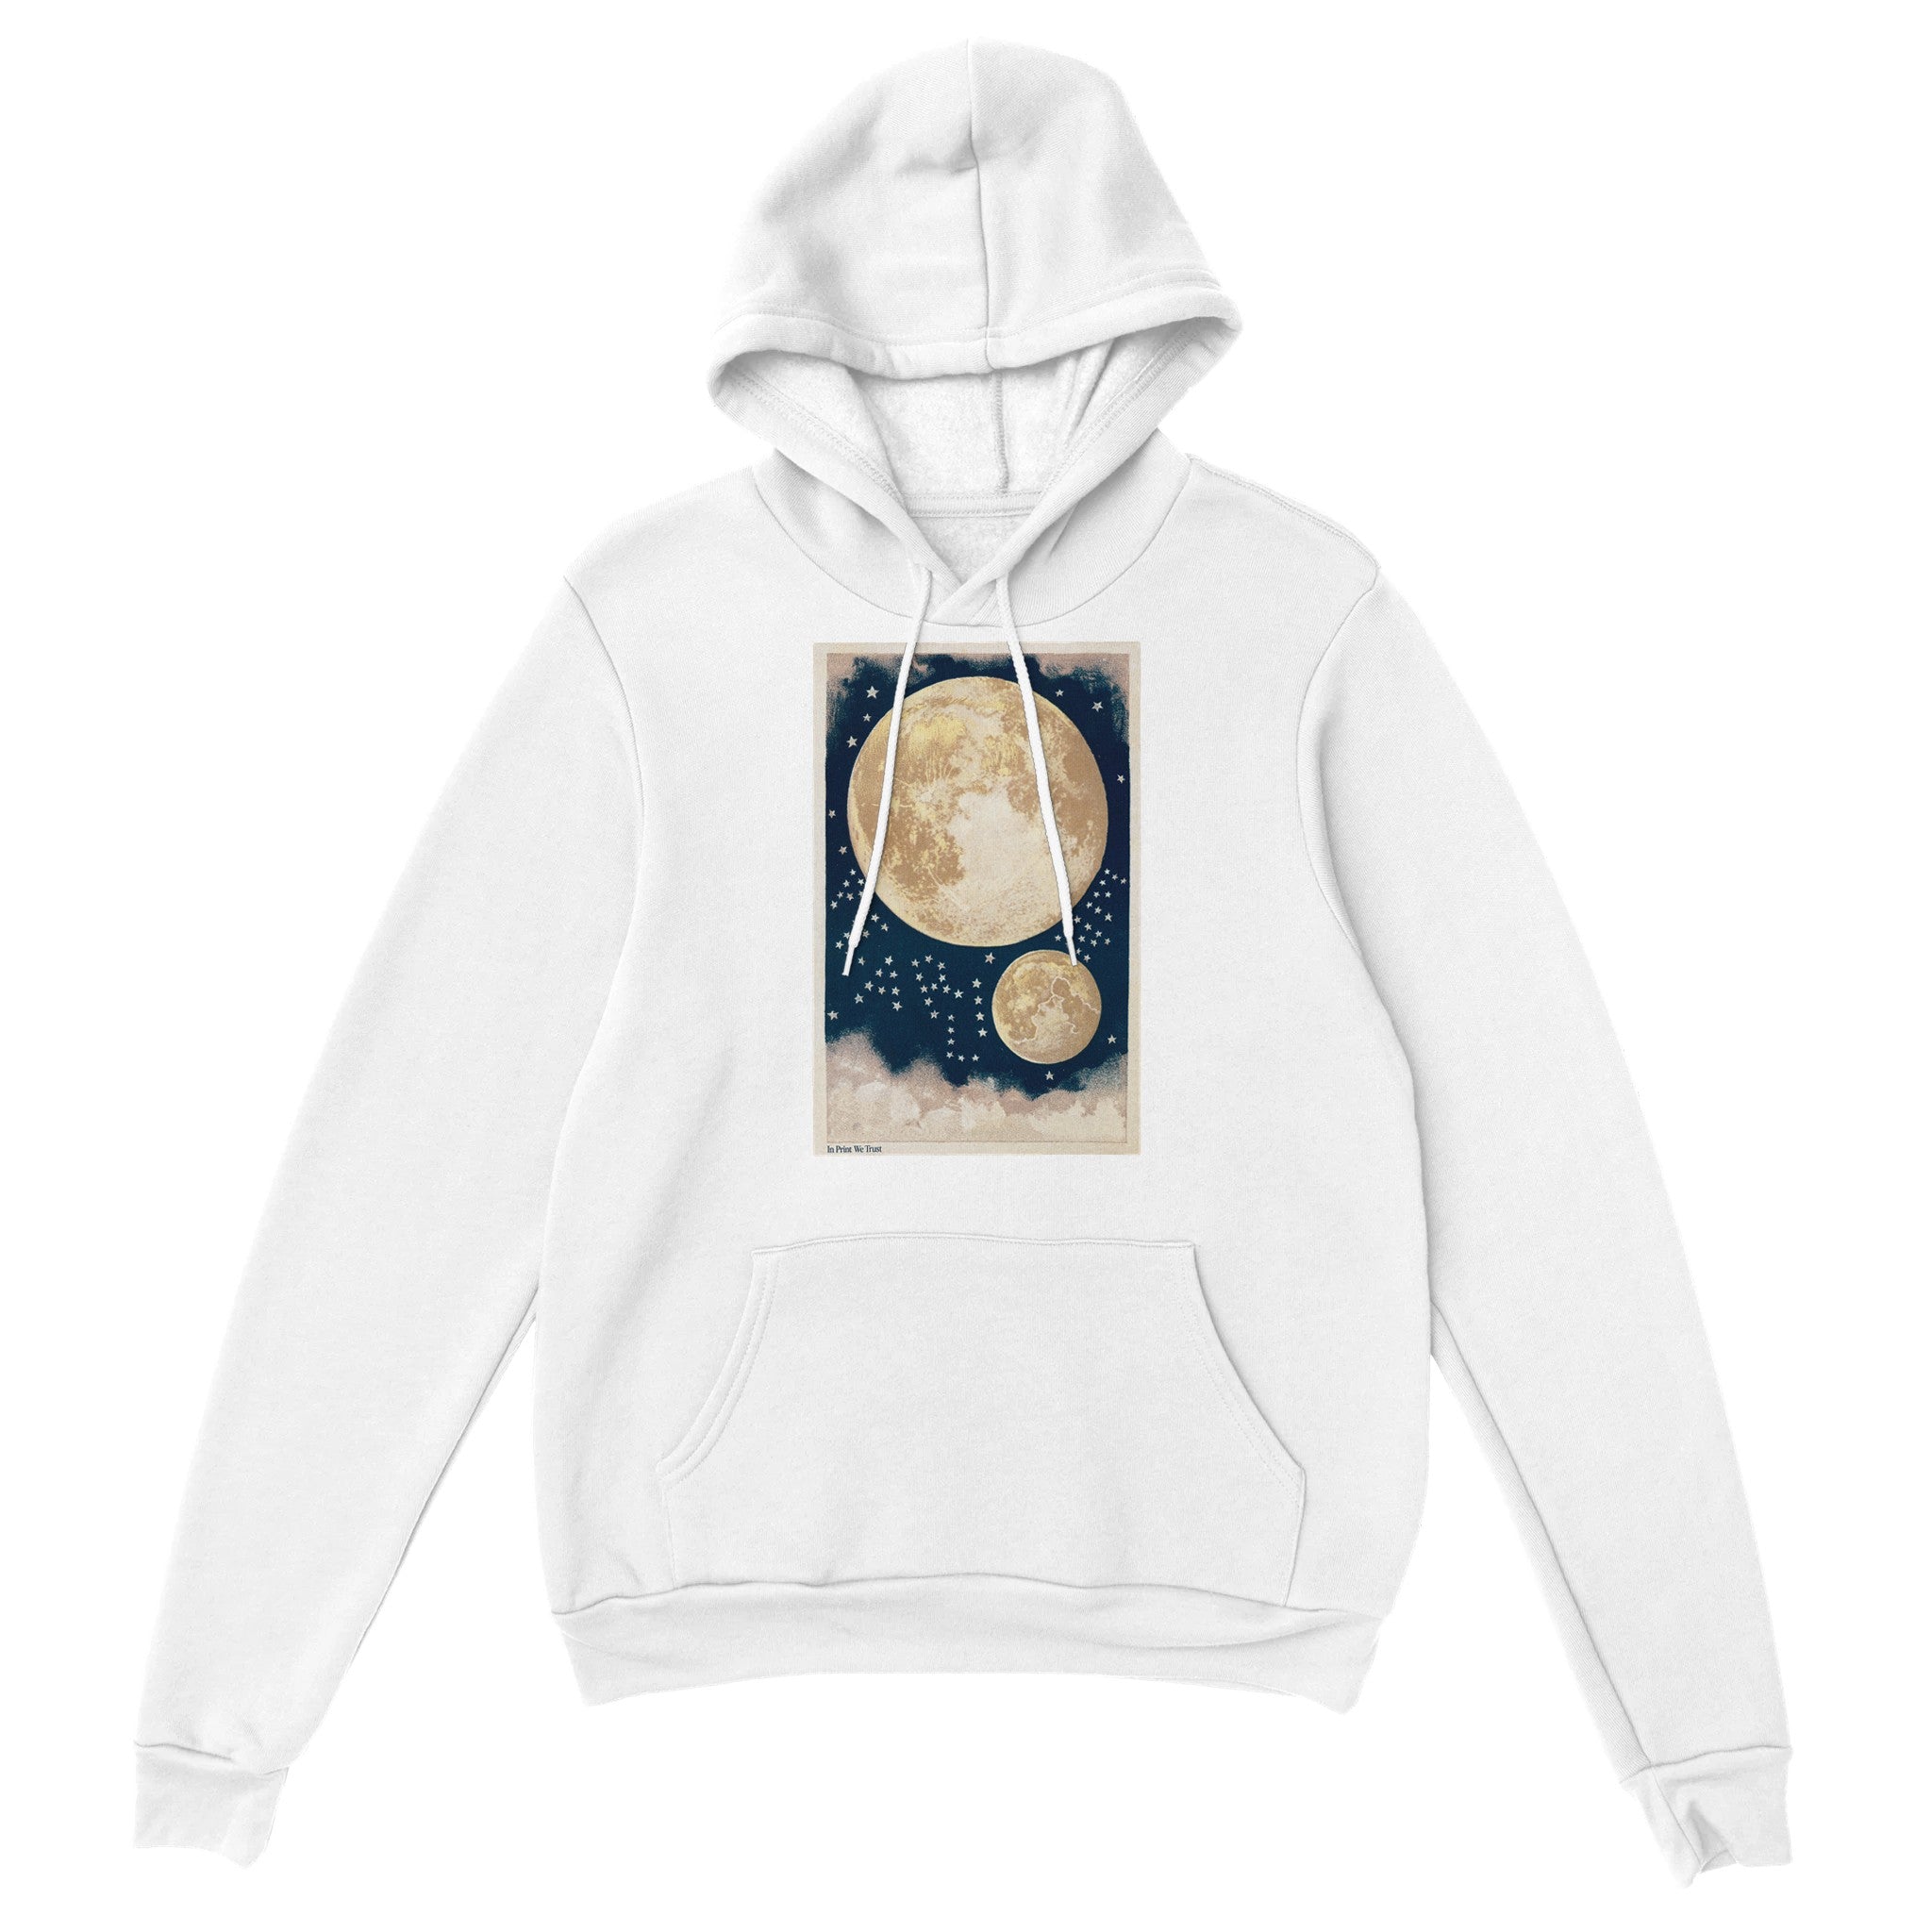 'To the moon and back' hoodie - In Print We Trust